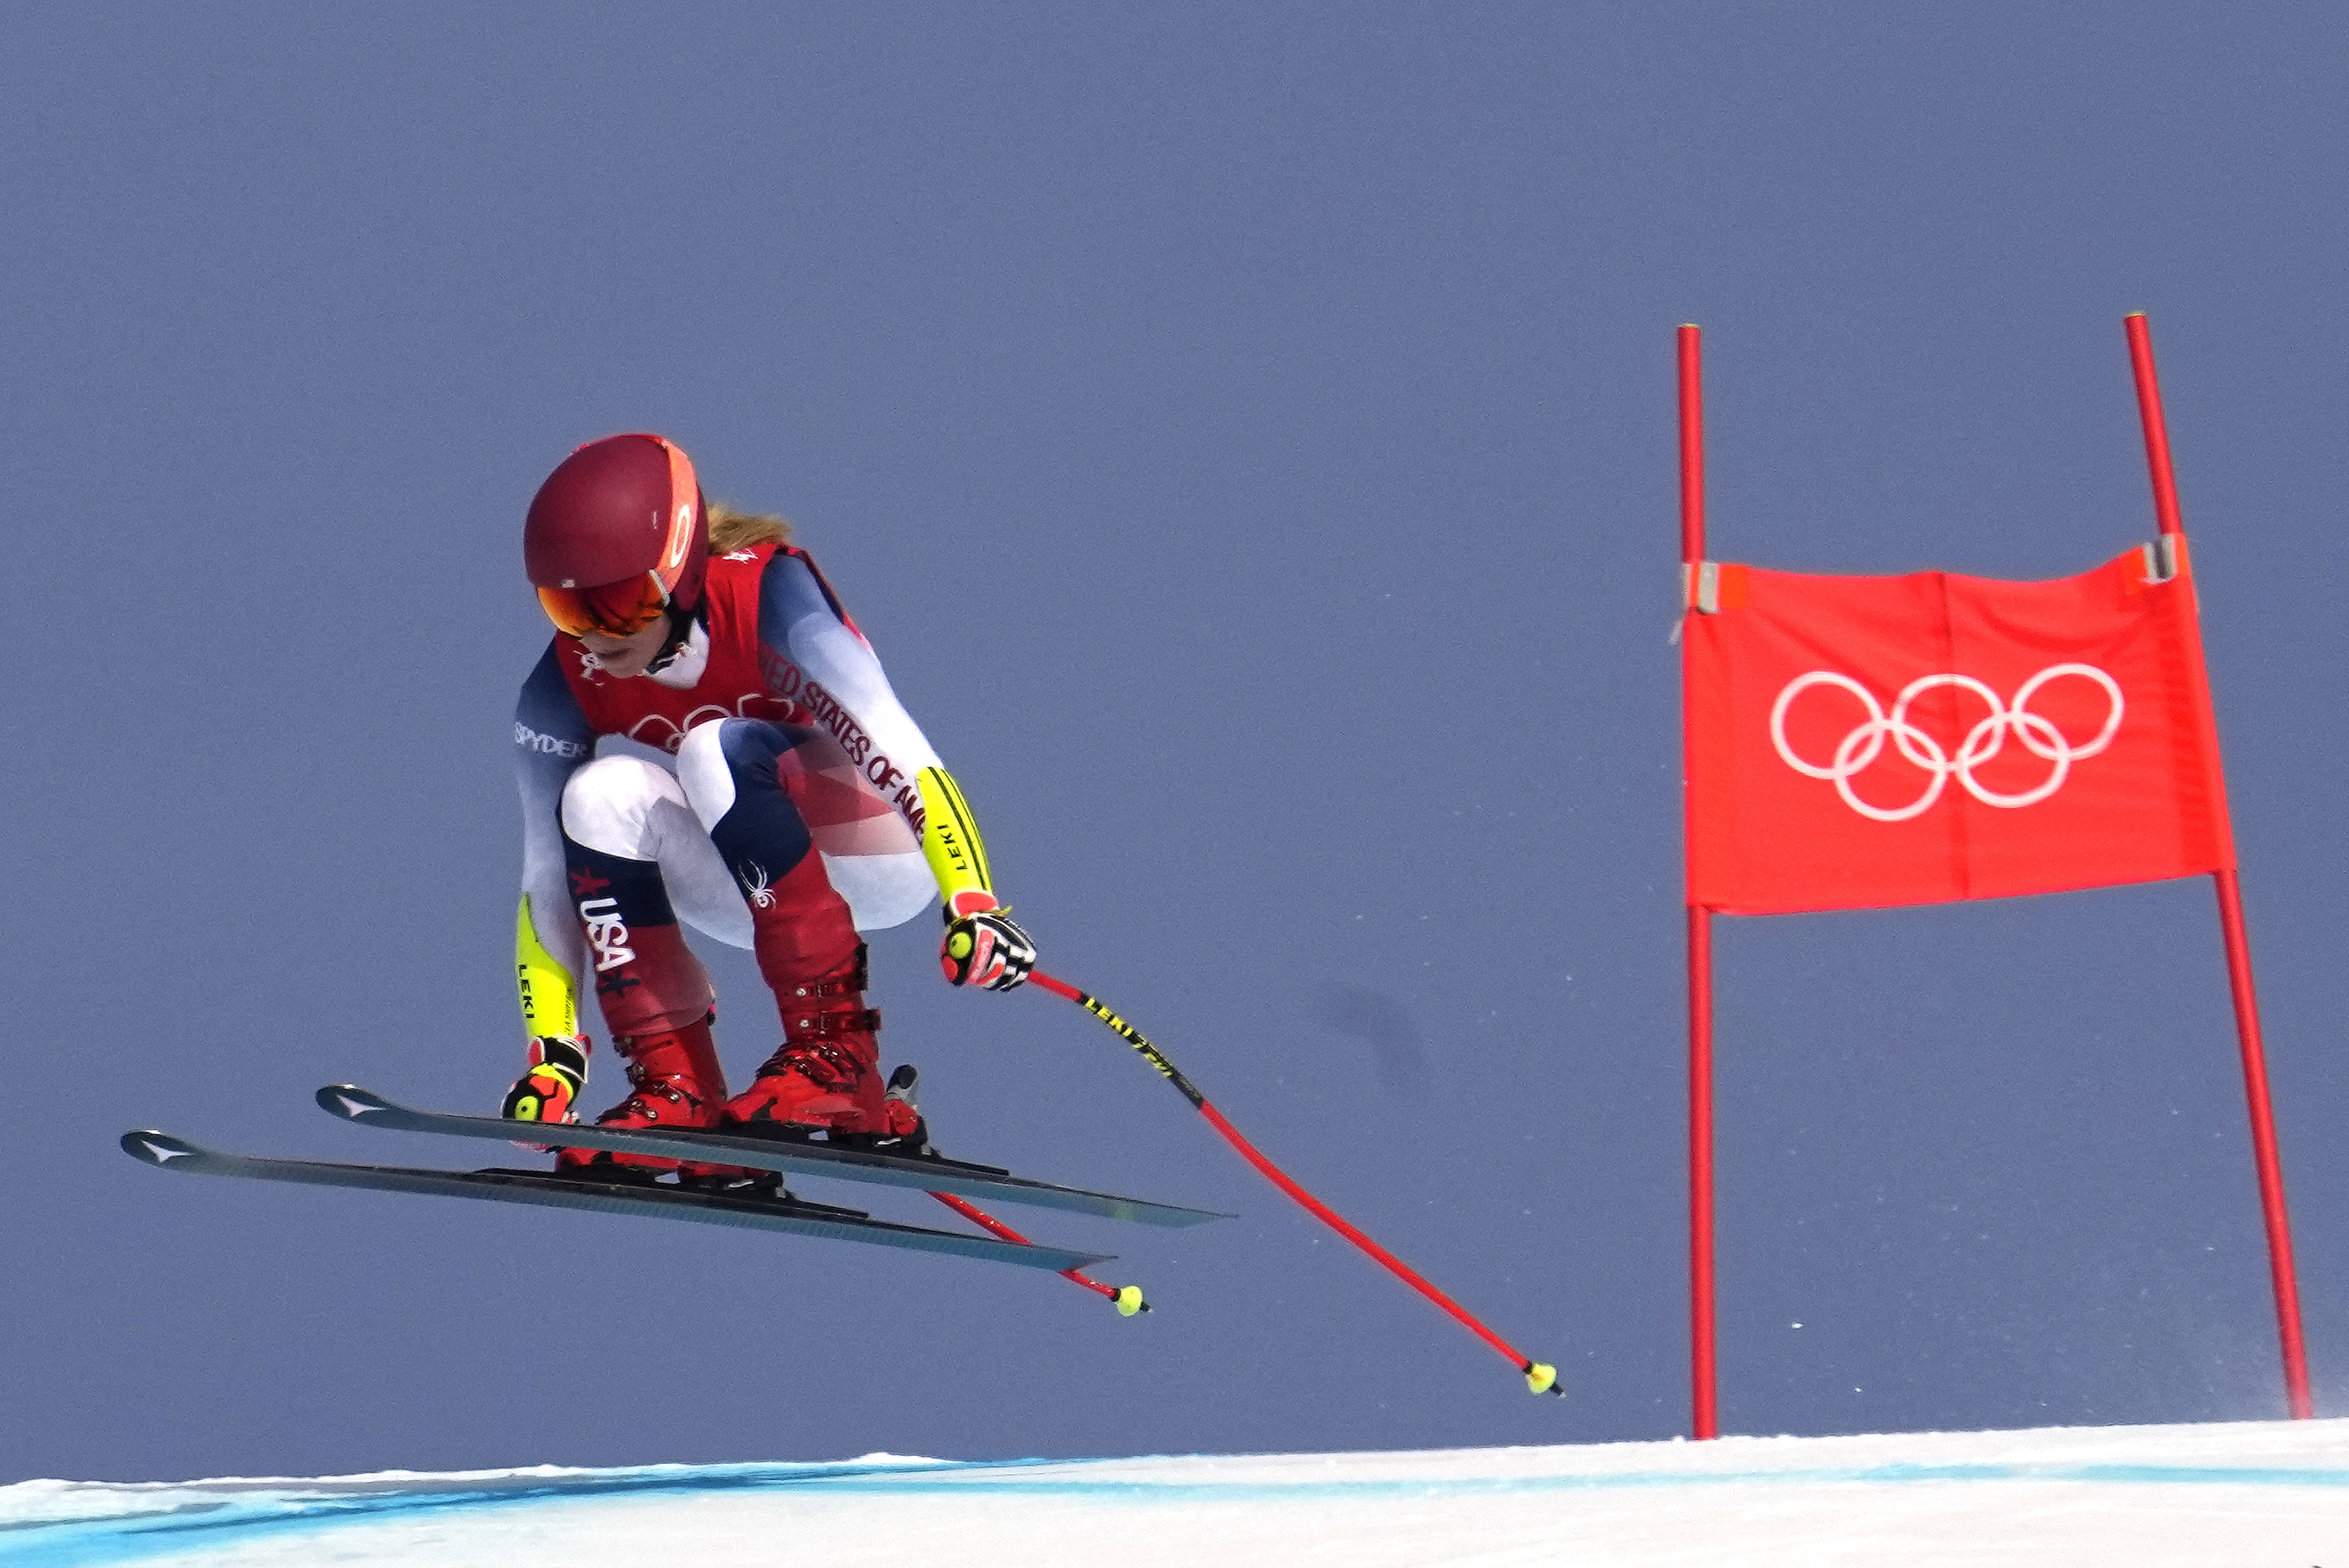 LIVE UPDATES: Shaun White in halfpipe, Mikaela Shiffrin in super-G on Day 7  of Winter Olympics